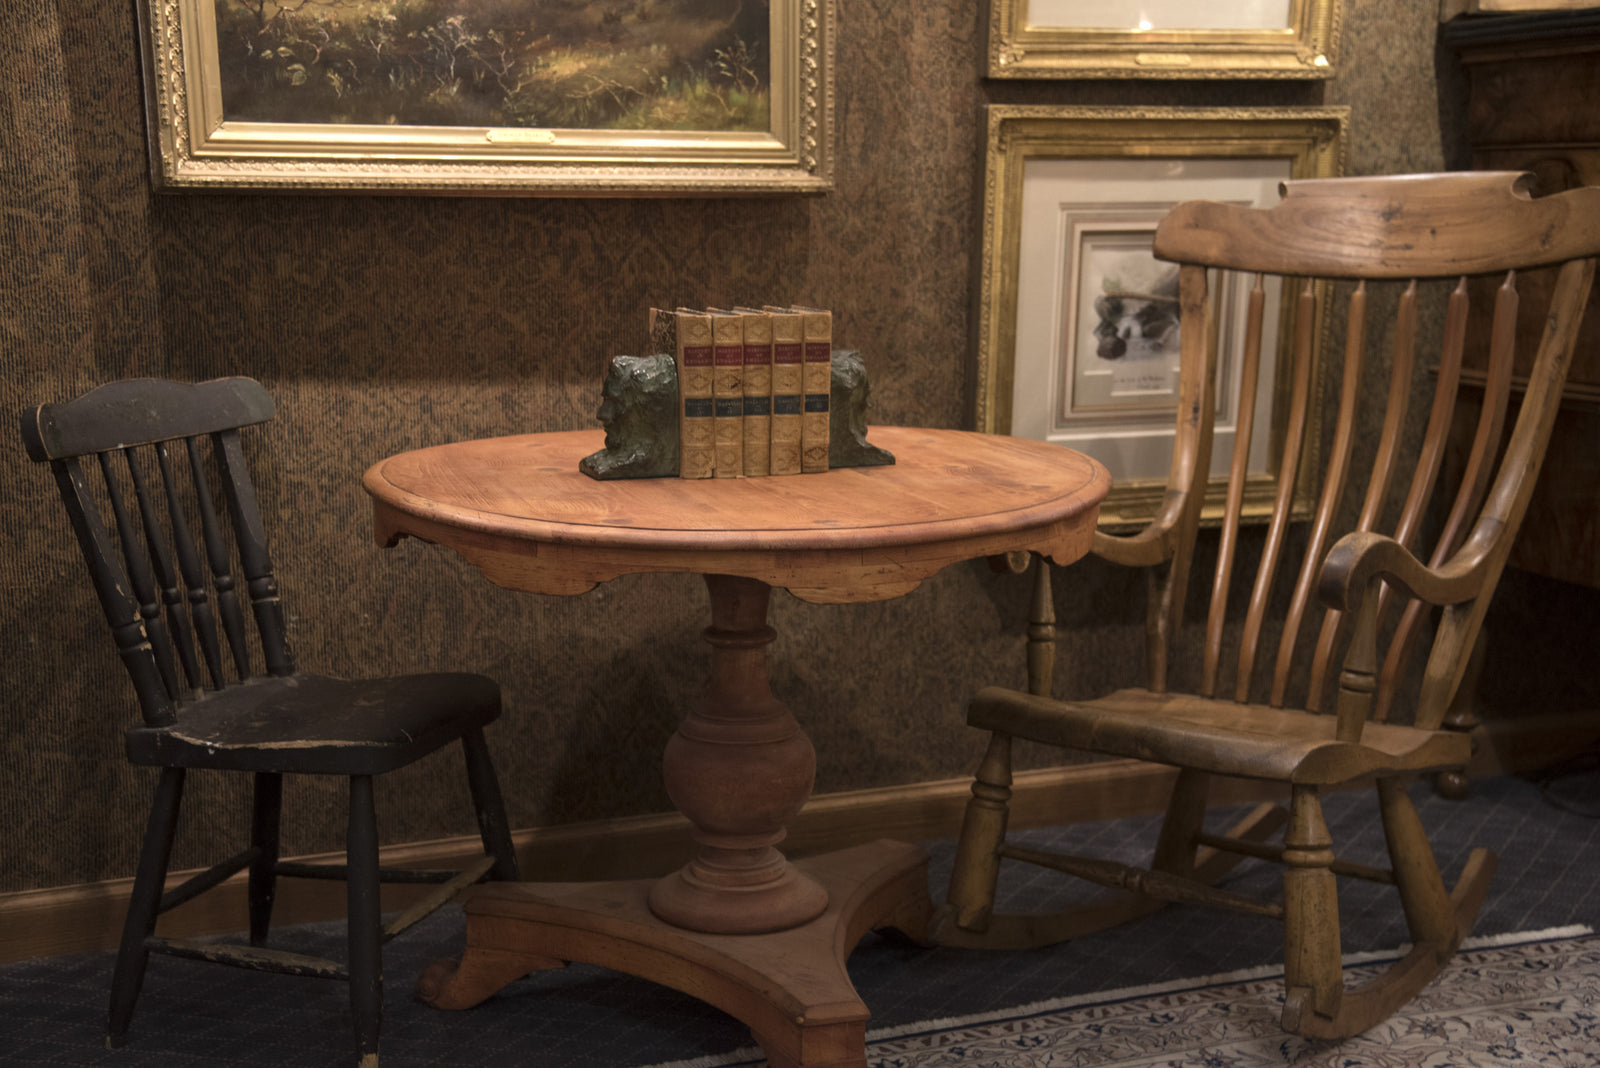 A Private Collection of Rare, Early Pioneer Furniture & Art Now on View